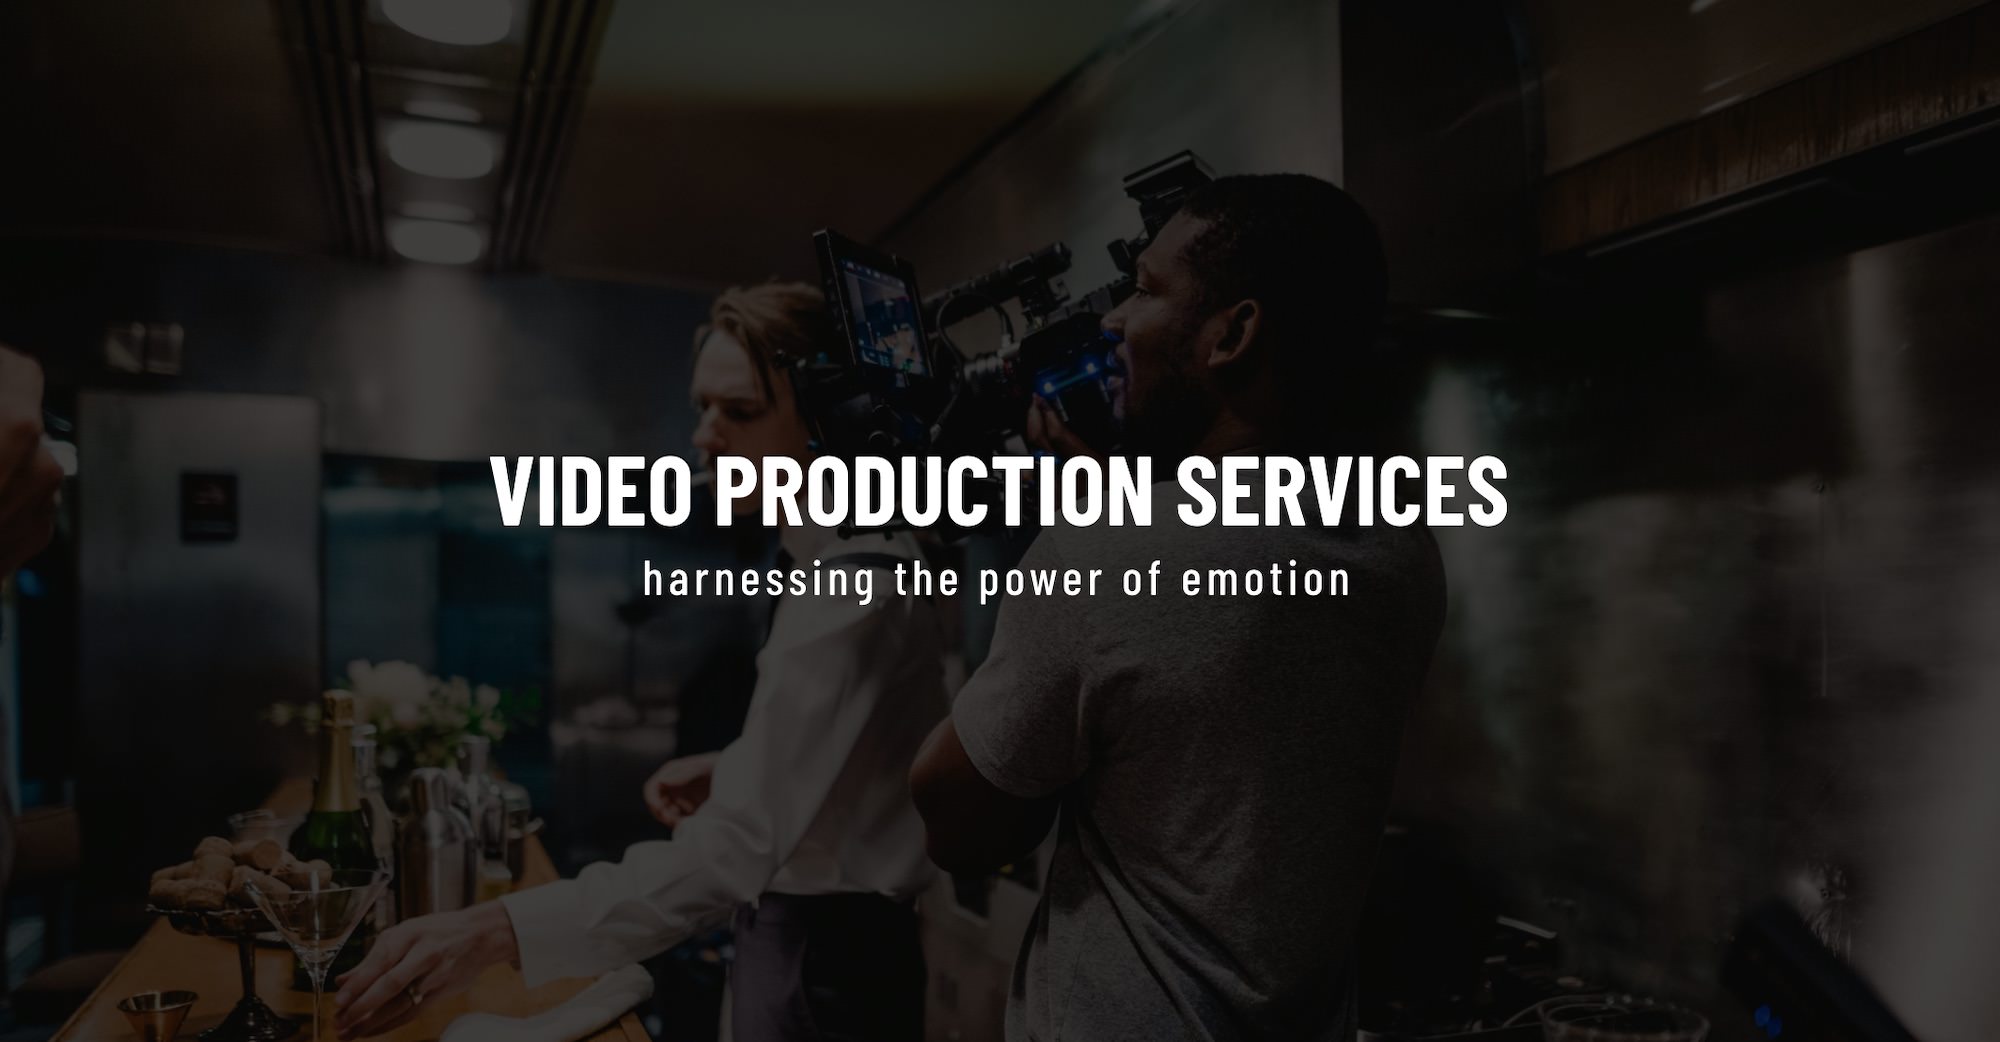 White Video Production Services title Creative Marketing Services by C&I Studios on dimmed background side profile of videographer filming bartender in a train car